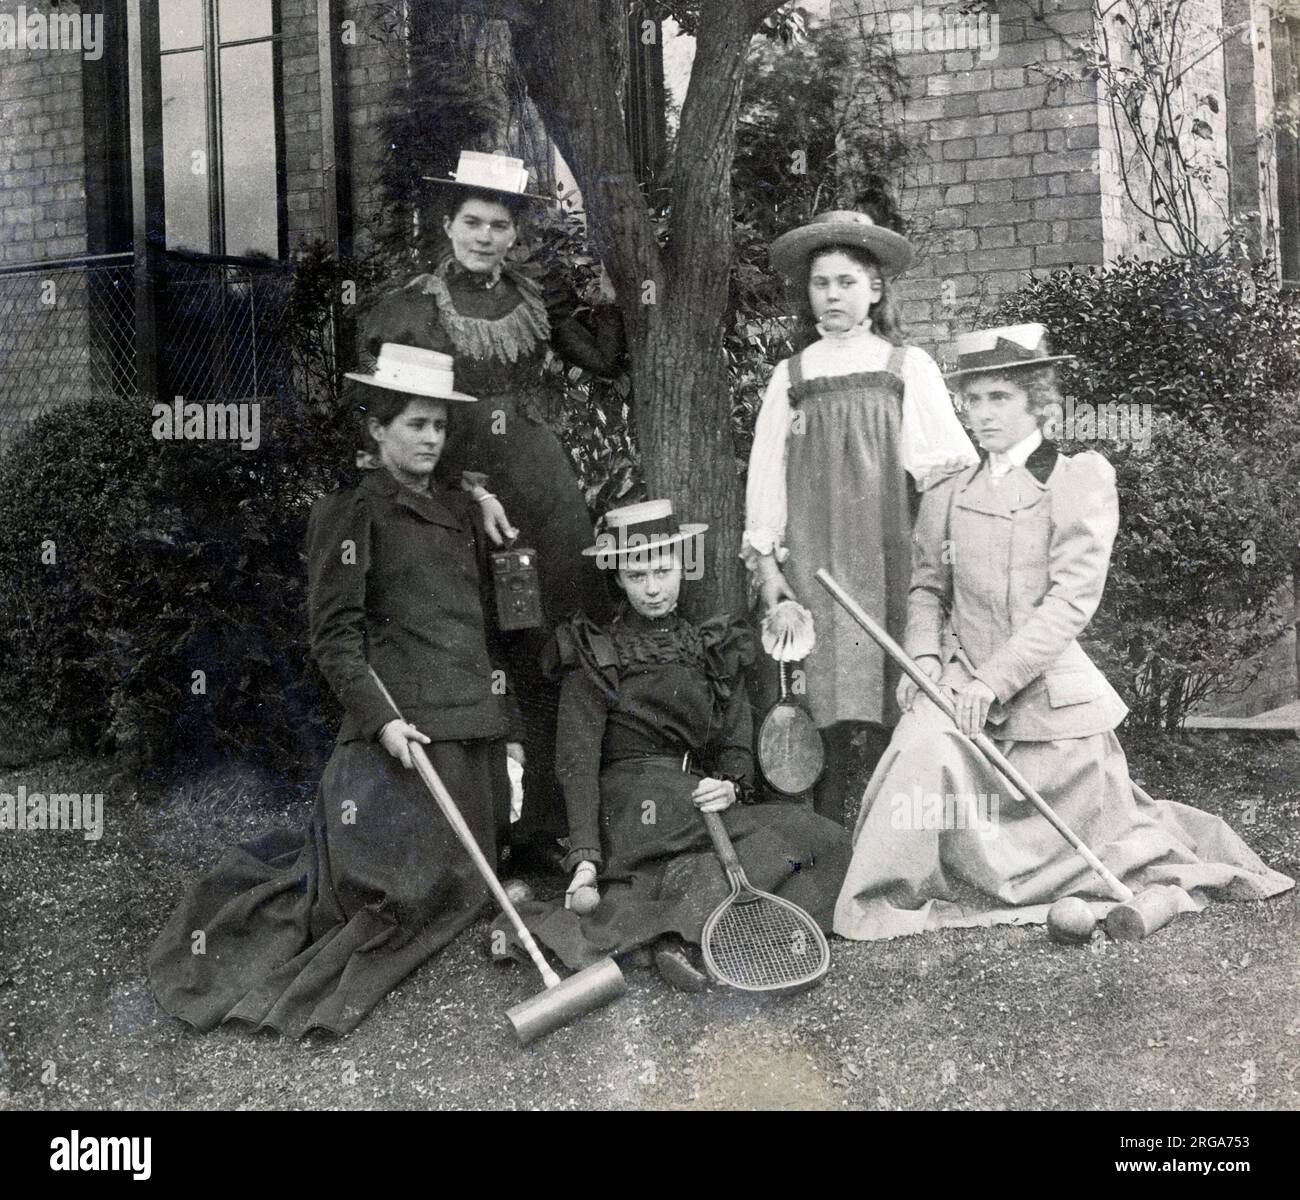 A group of women and girls, probably from the same family, pose for a photograph in the garden with various sporting accoutrements - croquet mallets, tennis racquets and badminton racquet and shuttlecock - all popular pursuits for the late Victorian or Edwardian lady. The girl back left is holding a photographic camera. Stock Photo